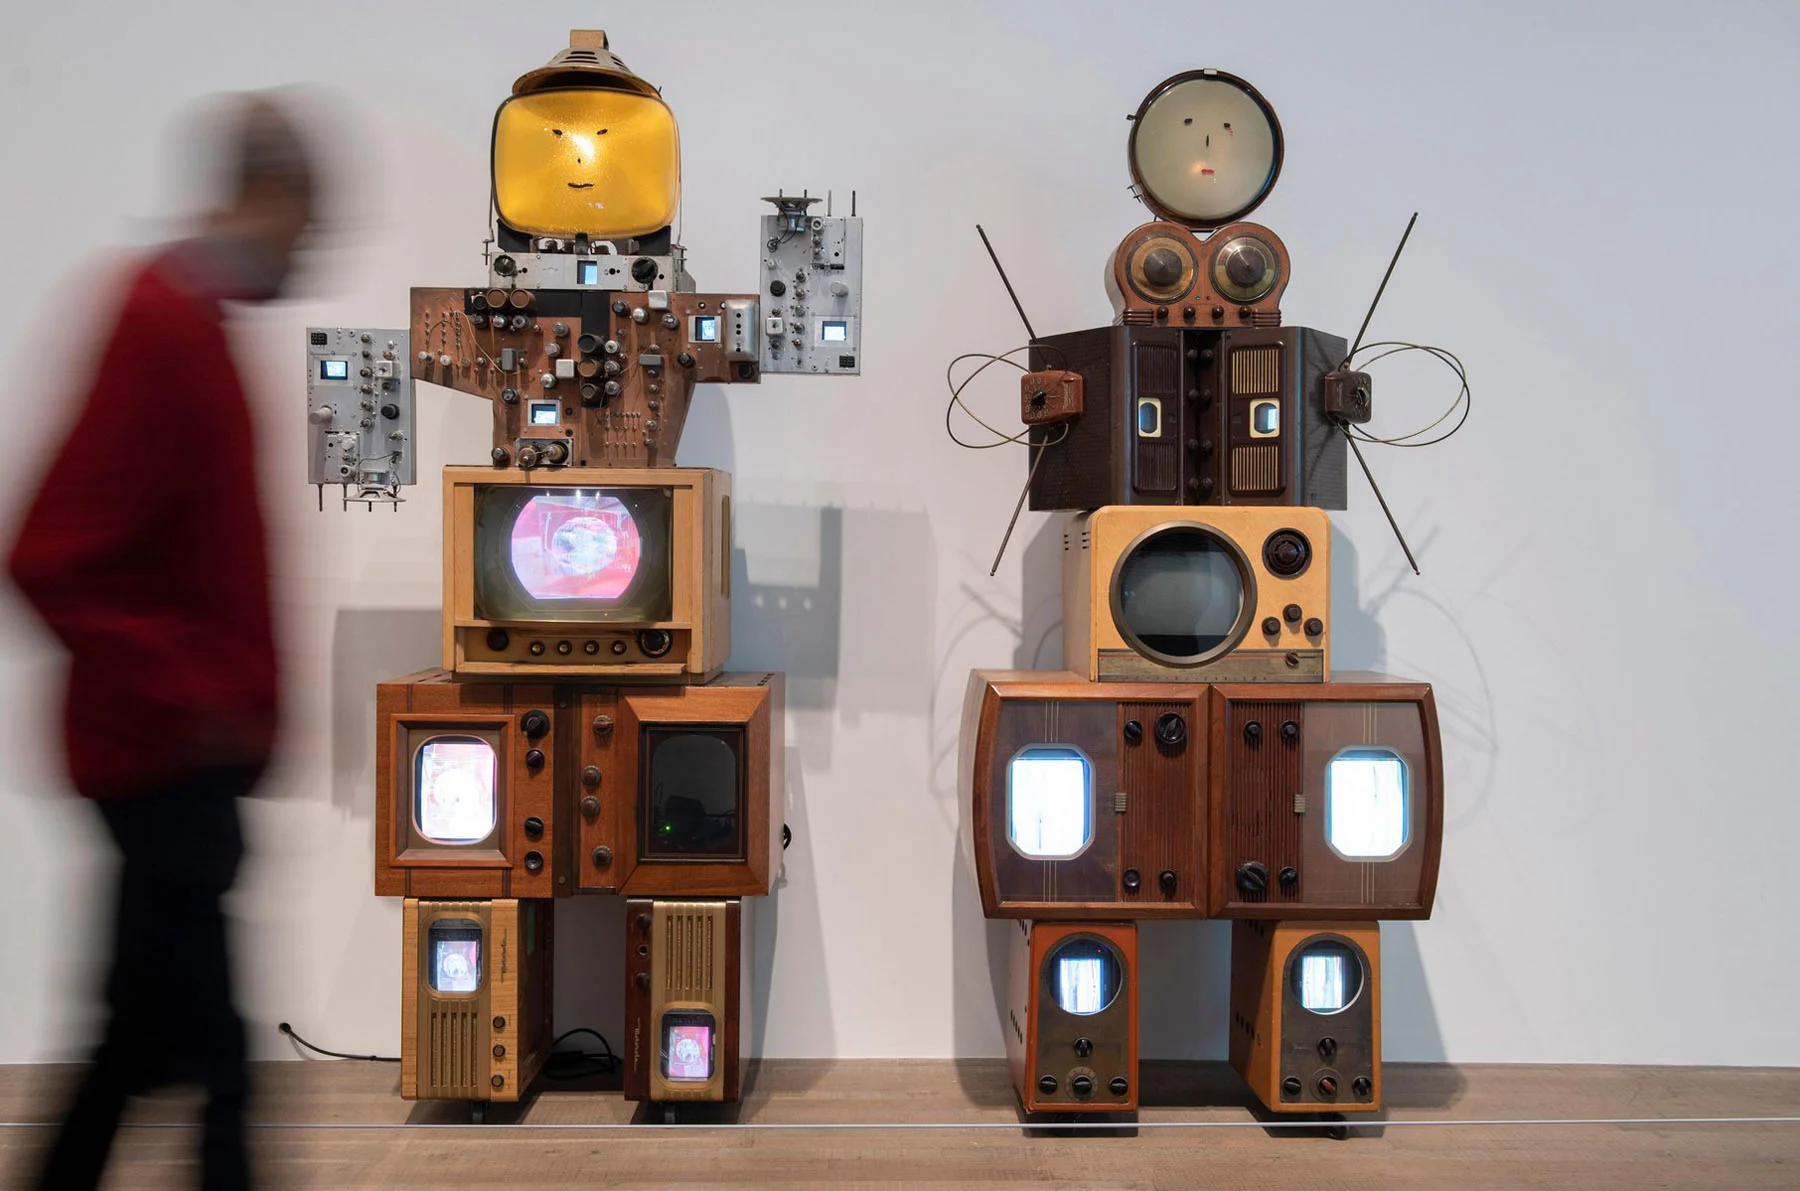 Two sculptures, shaped like robots, stand next to each other in front of a white wall at a museum. Each sculpture is made up of a number of old televisions and switchboards. Both appear to have faces. A blurry museum goer on the move is visible to the left.